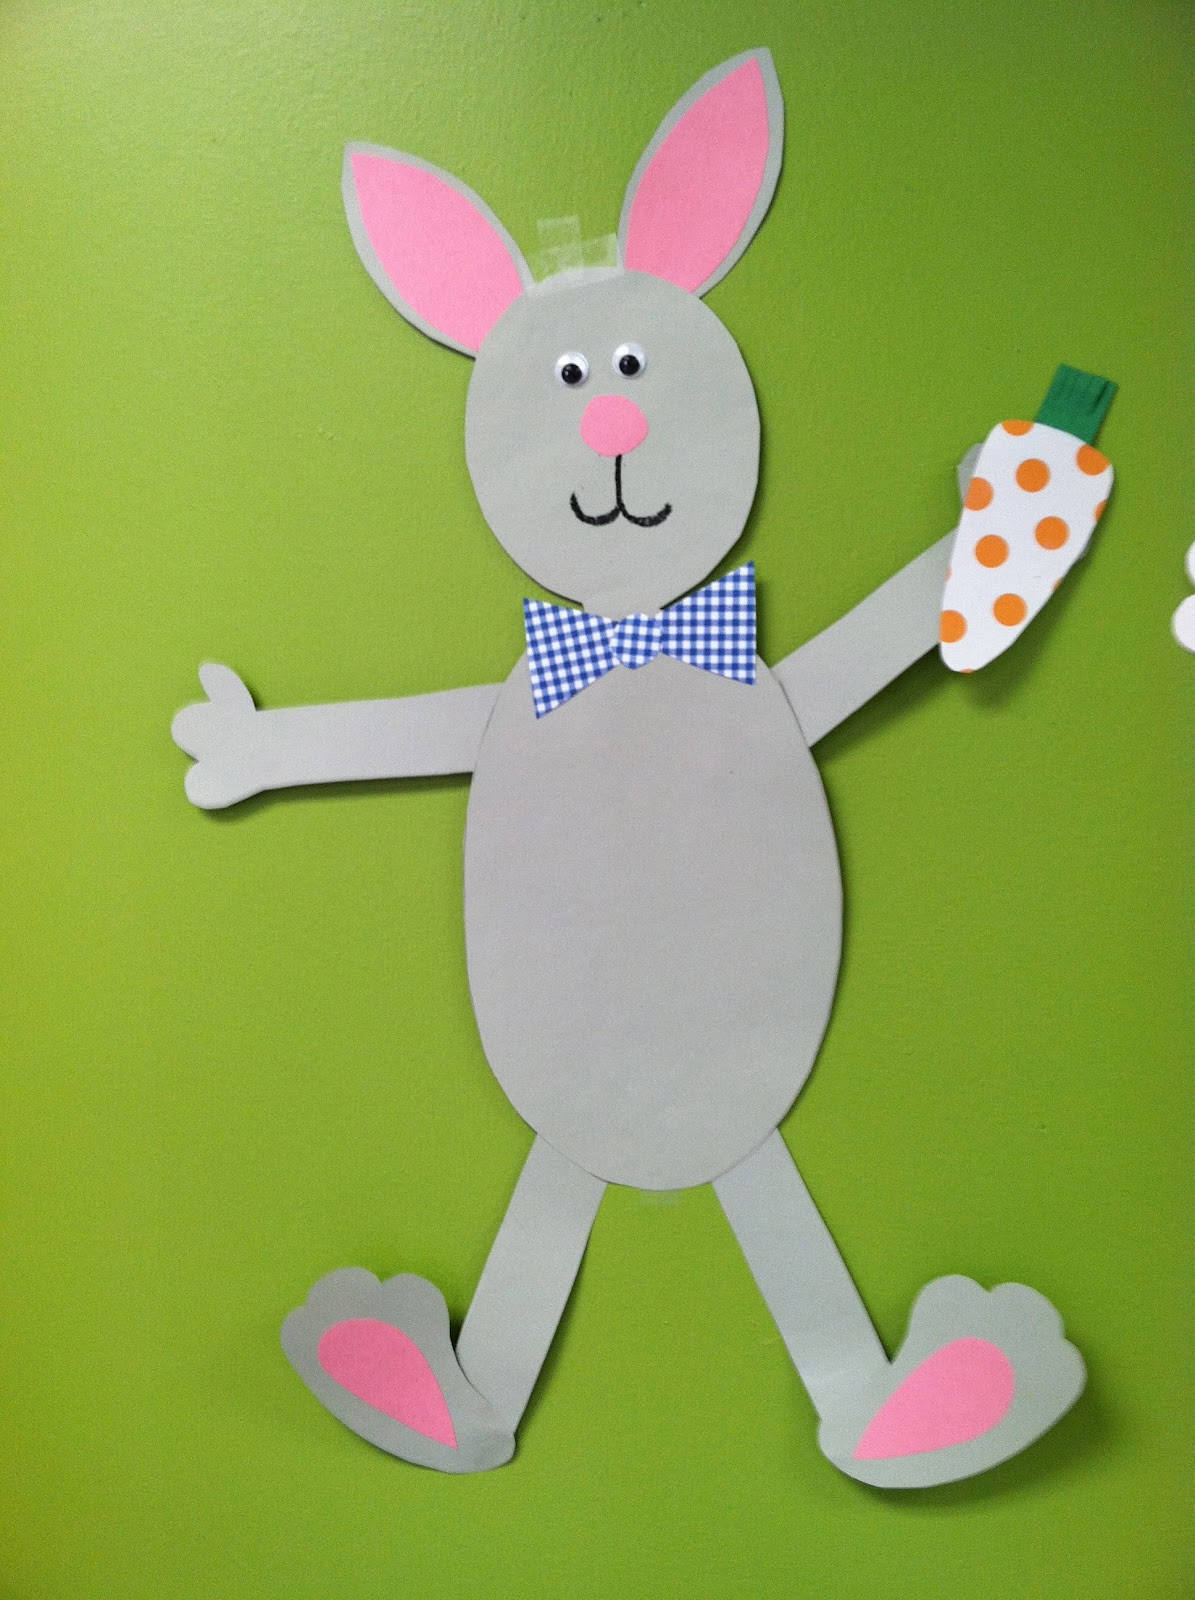 Easter Crafts For First Graders
 Life in First Grade If I Were the Easter Bunny